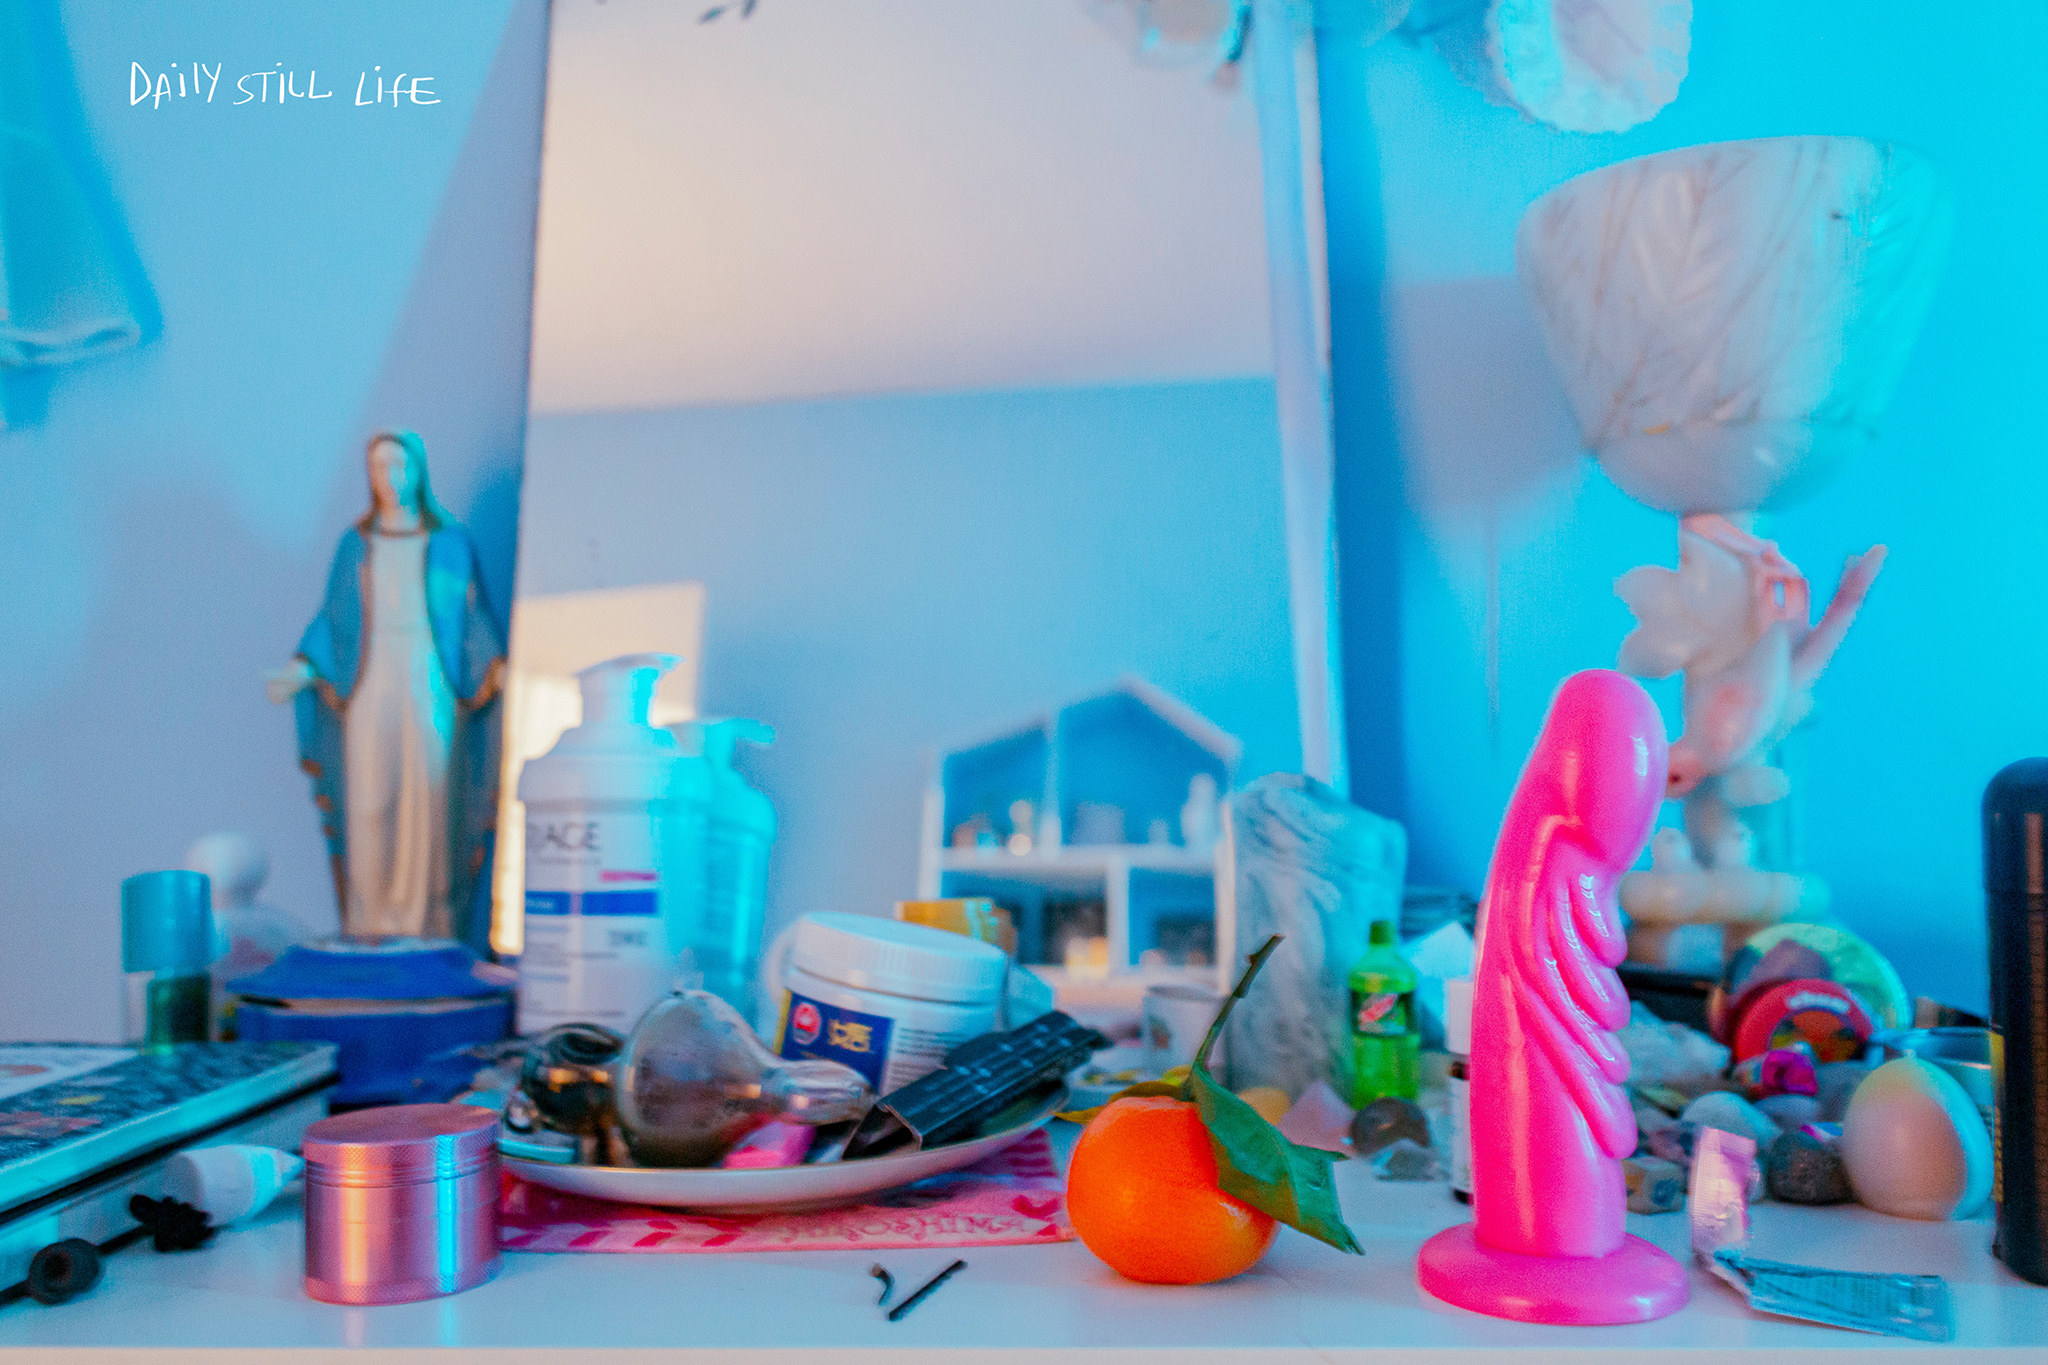 A dresser top with a pink dildo, a statue of mary, an orange, and other paraphenalia. 